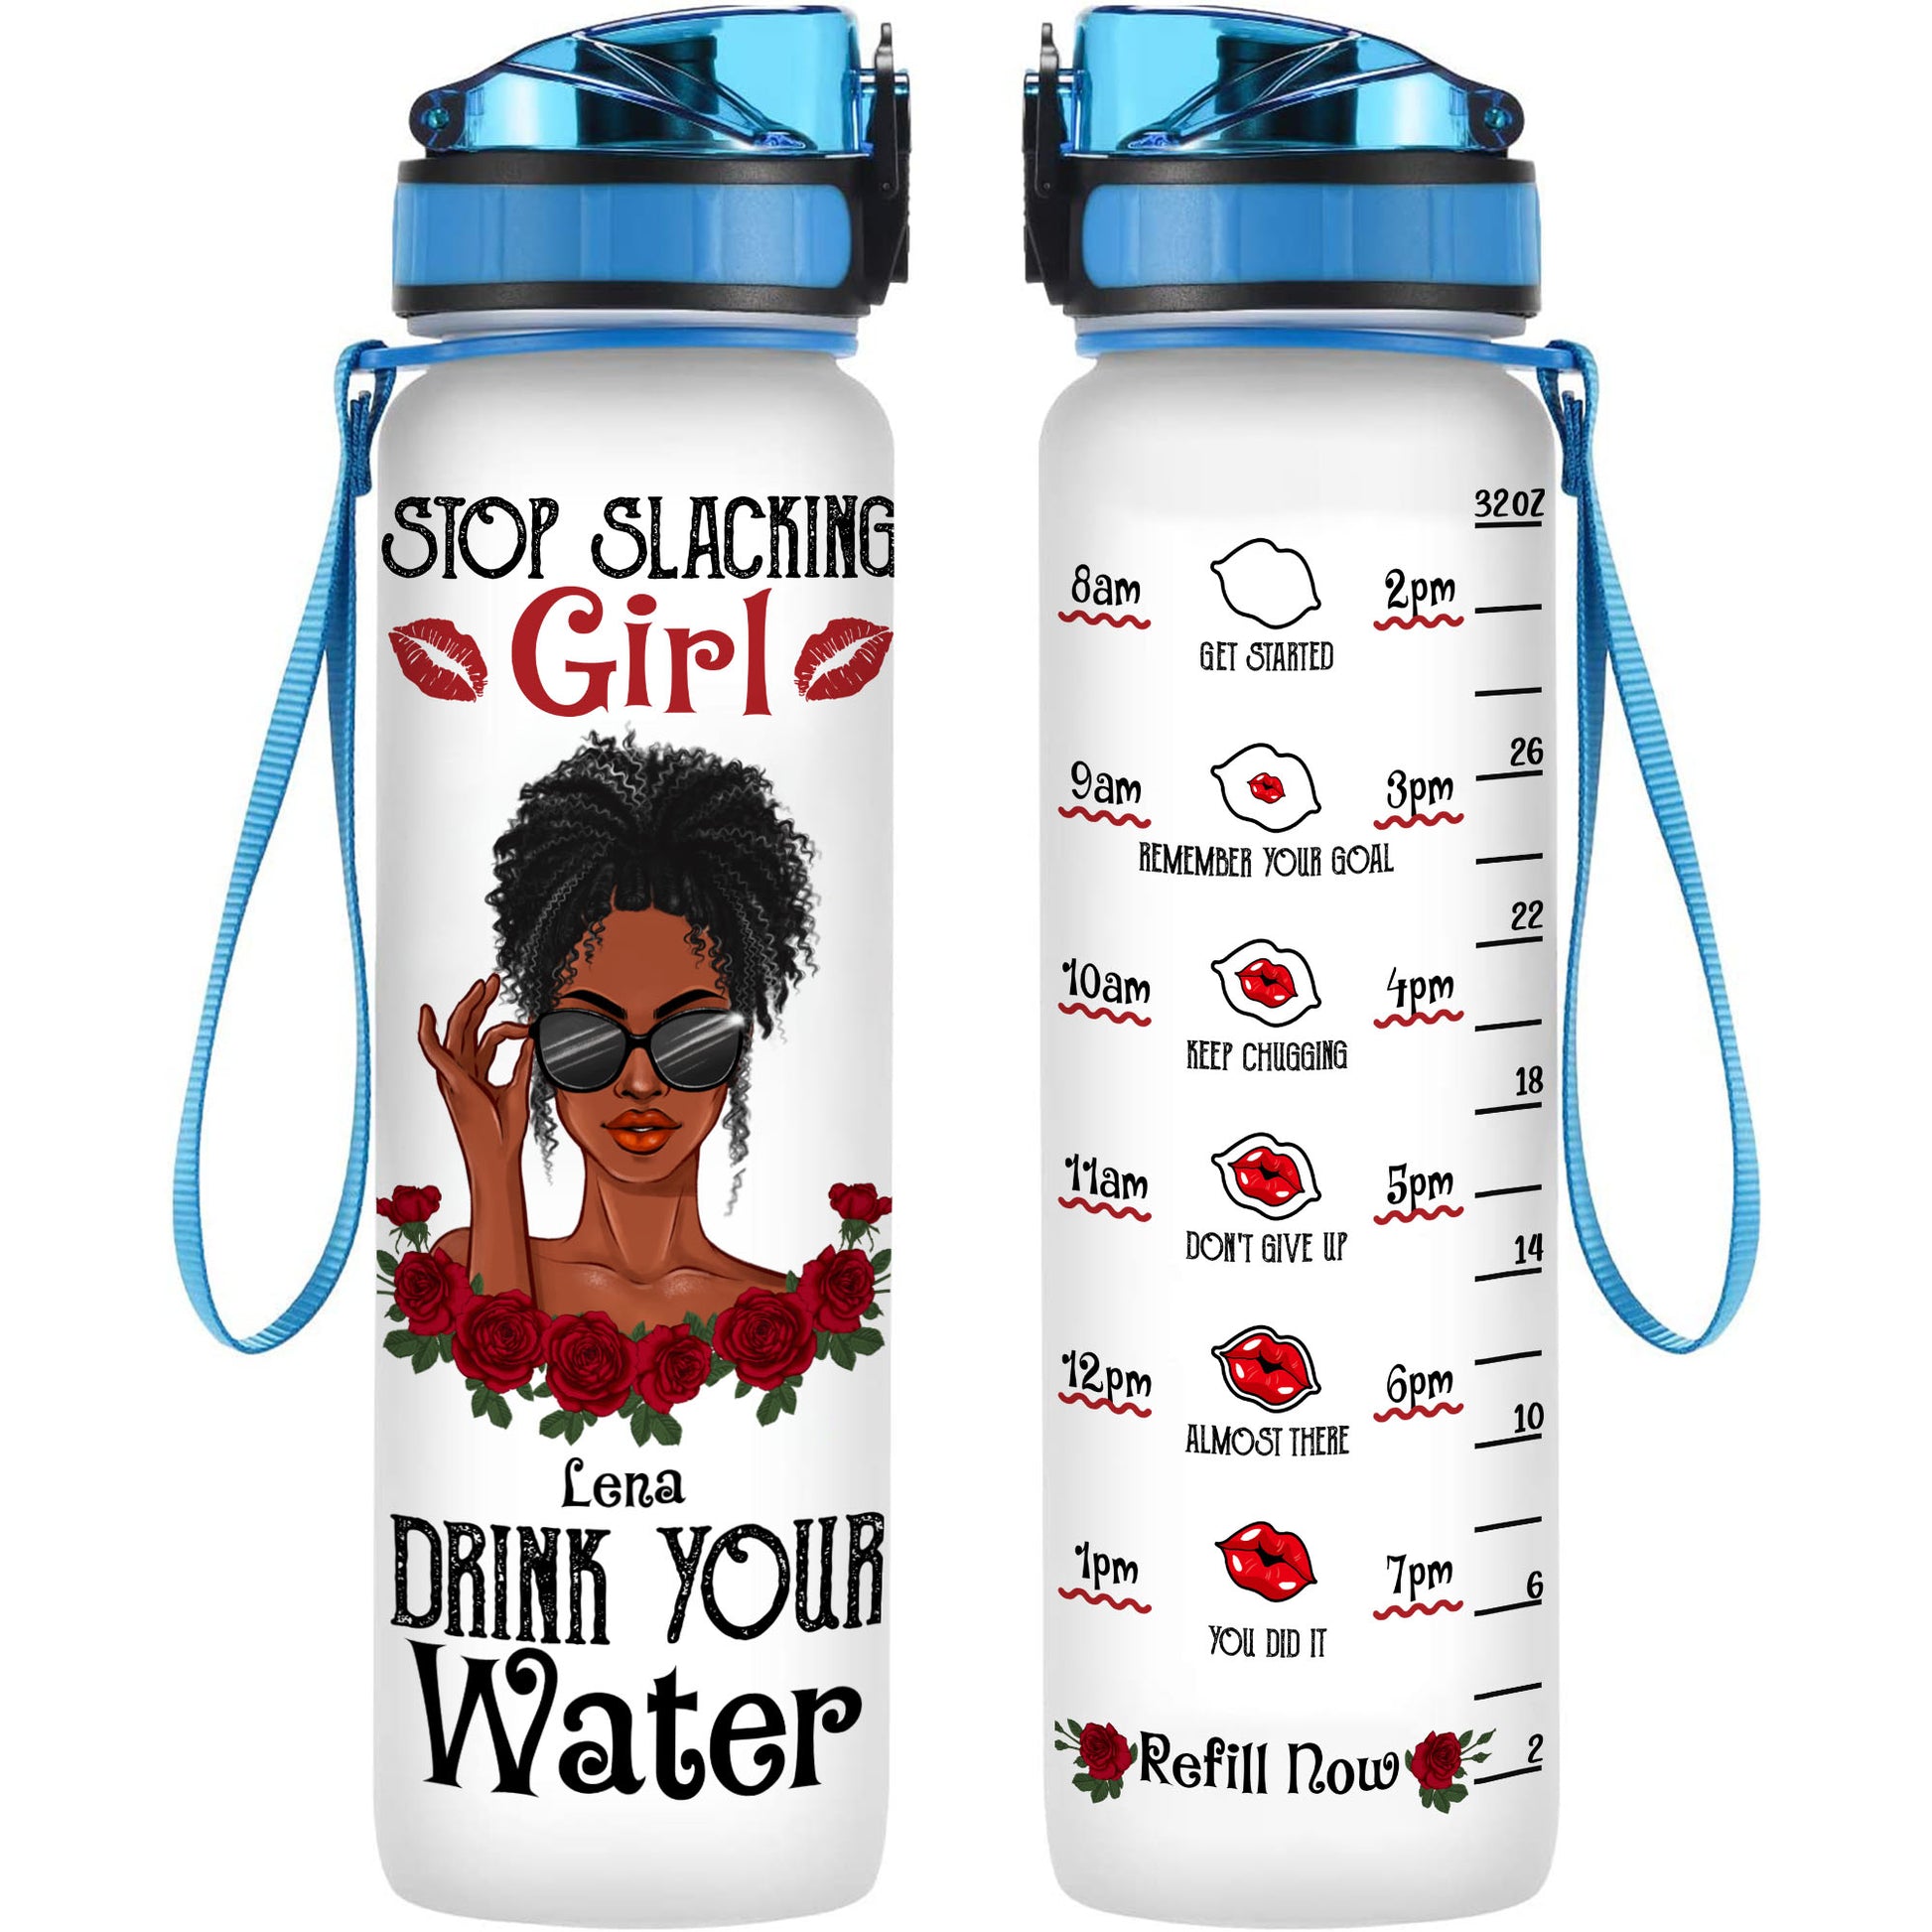 Girl Drink Your Water - Personalized Water Tracker Bottle - Birthday Gift For Her, Black Girl, Black Woman